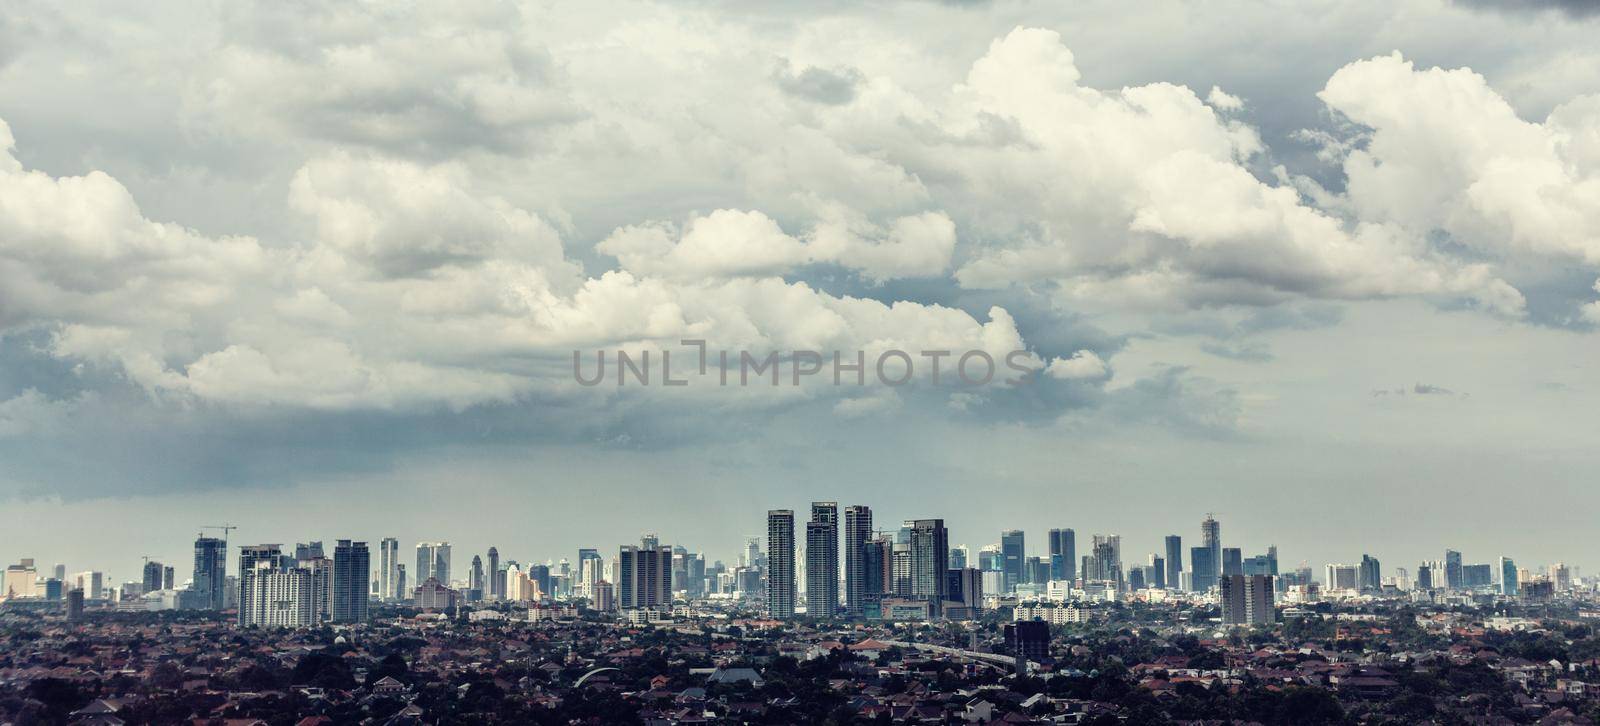 Jakarta city view with Kampung in foreground by Kzenon